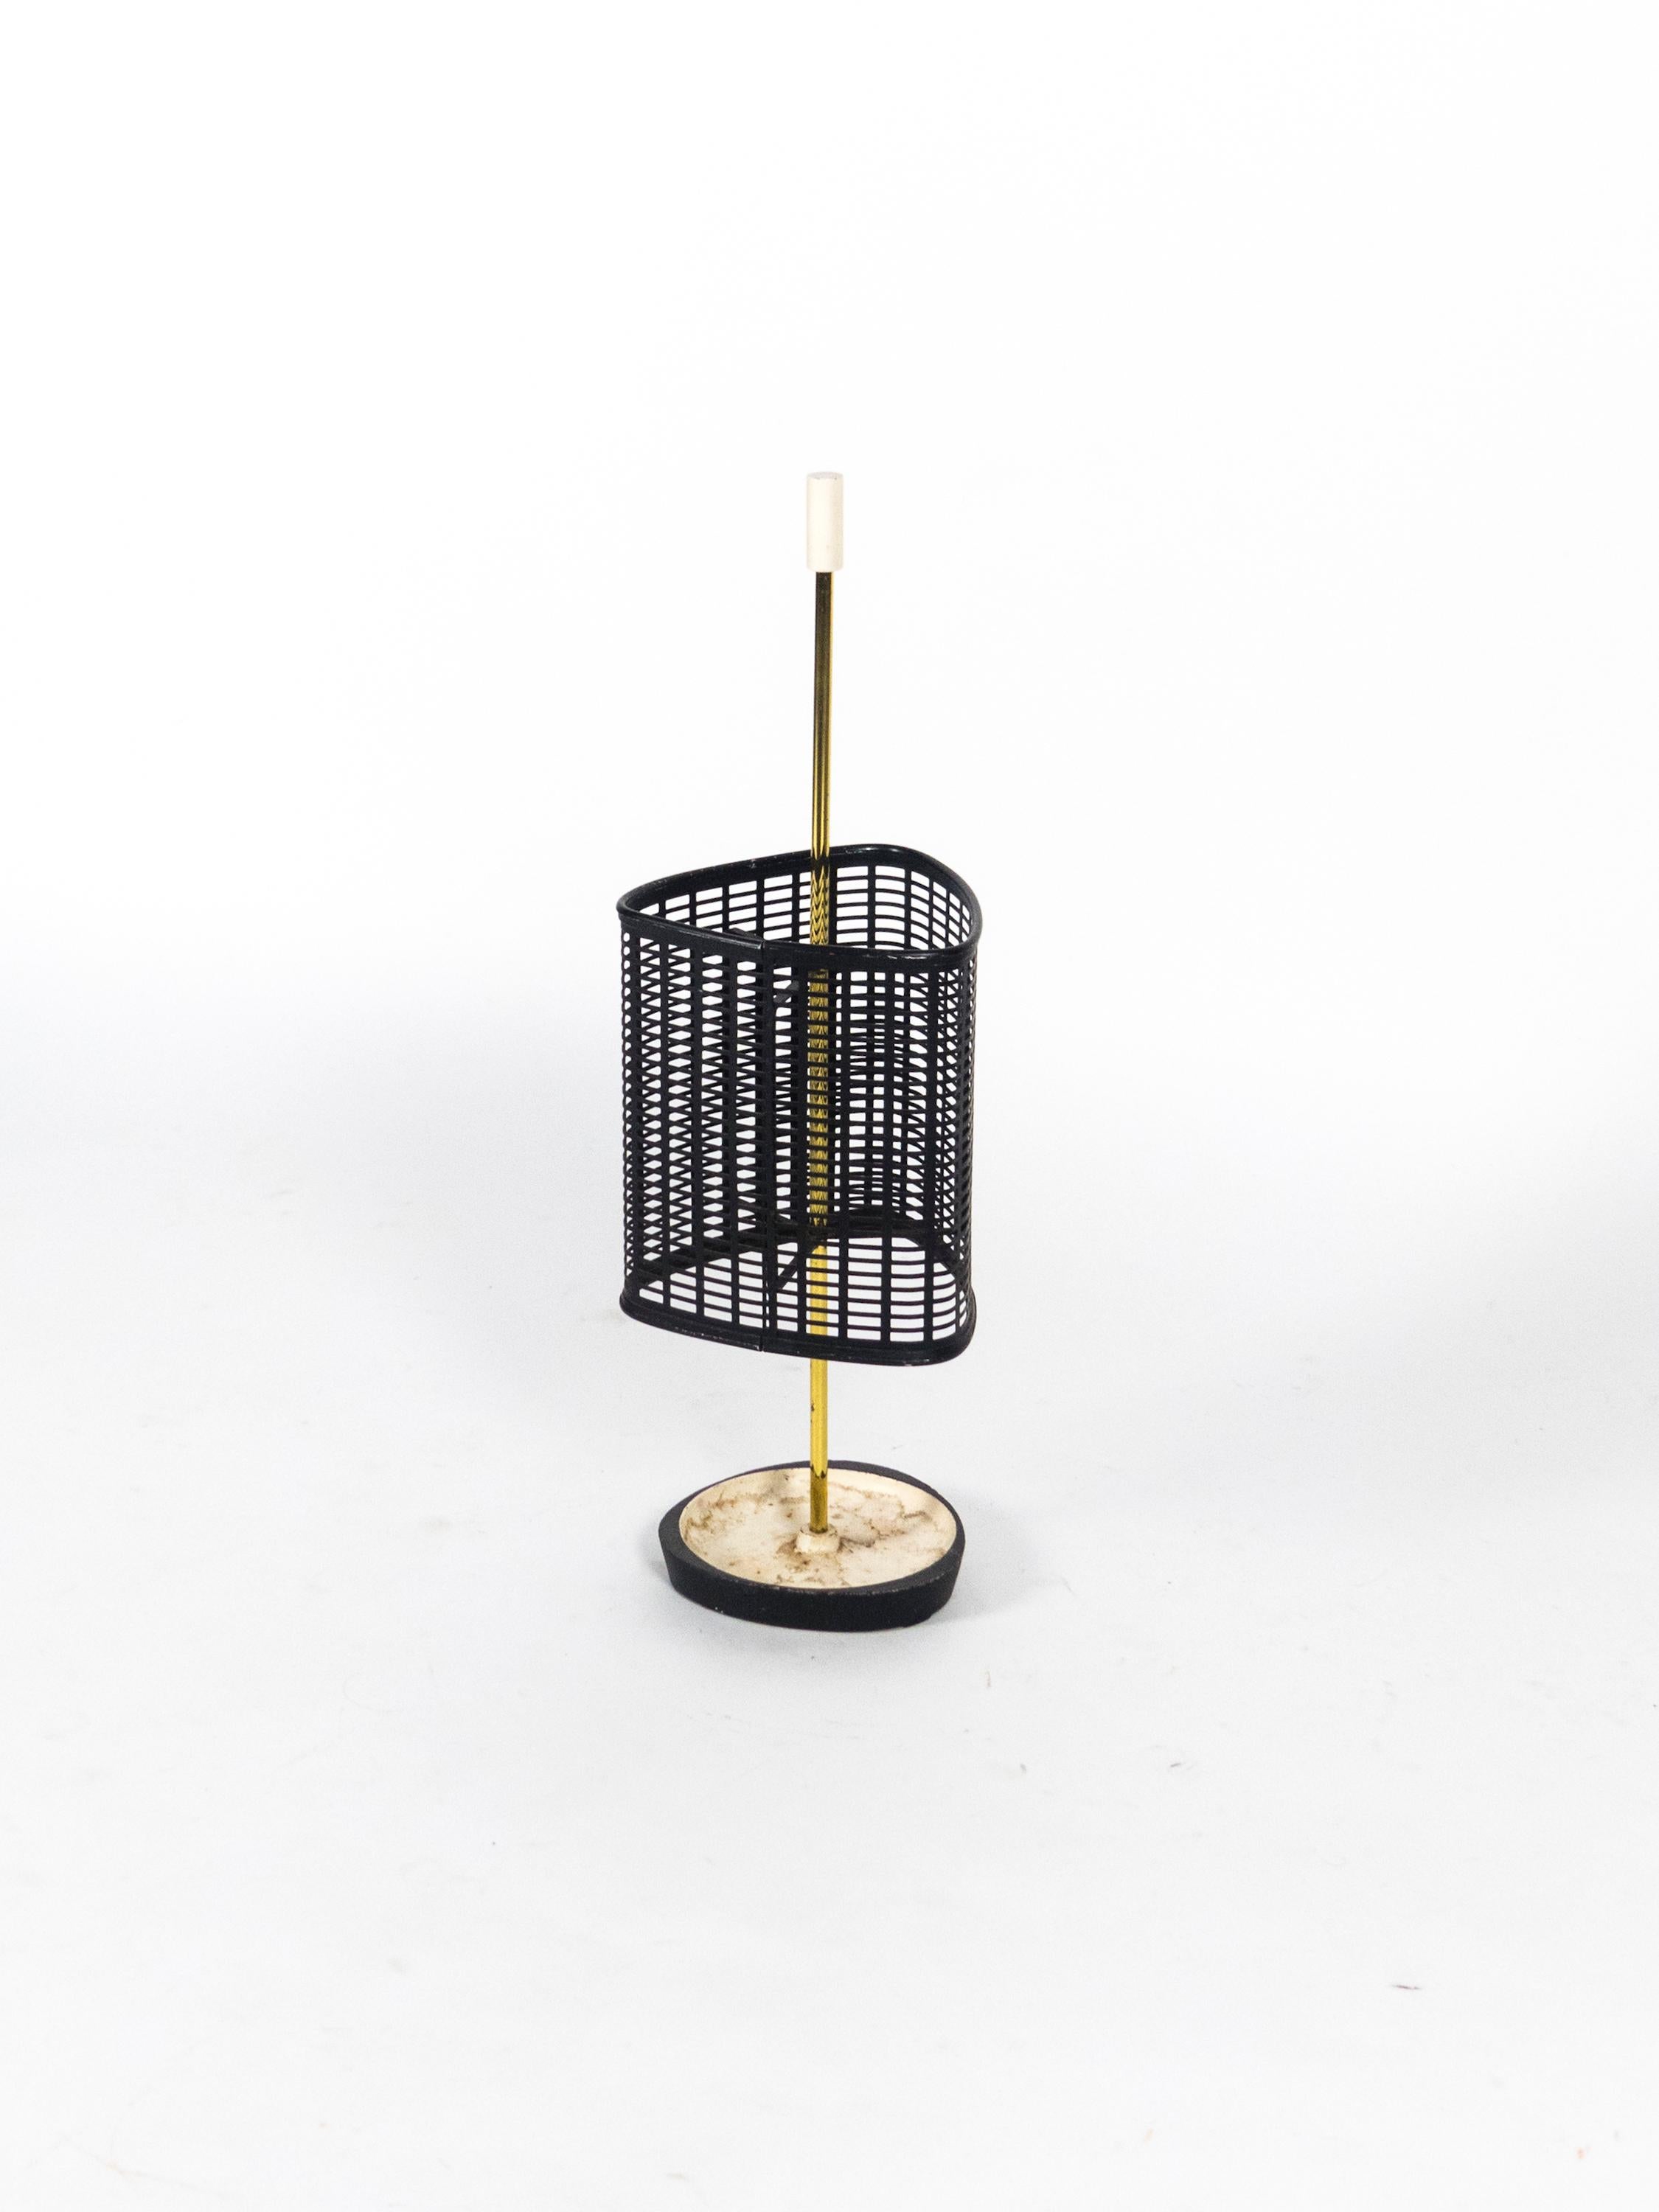 Midcentury Italian Brass and Perforated Metal Umbrella Stand, 1950s For Sale 1